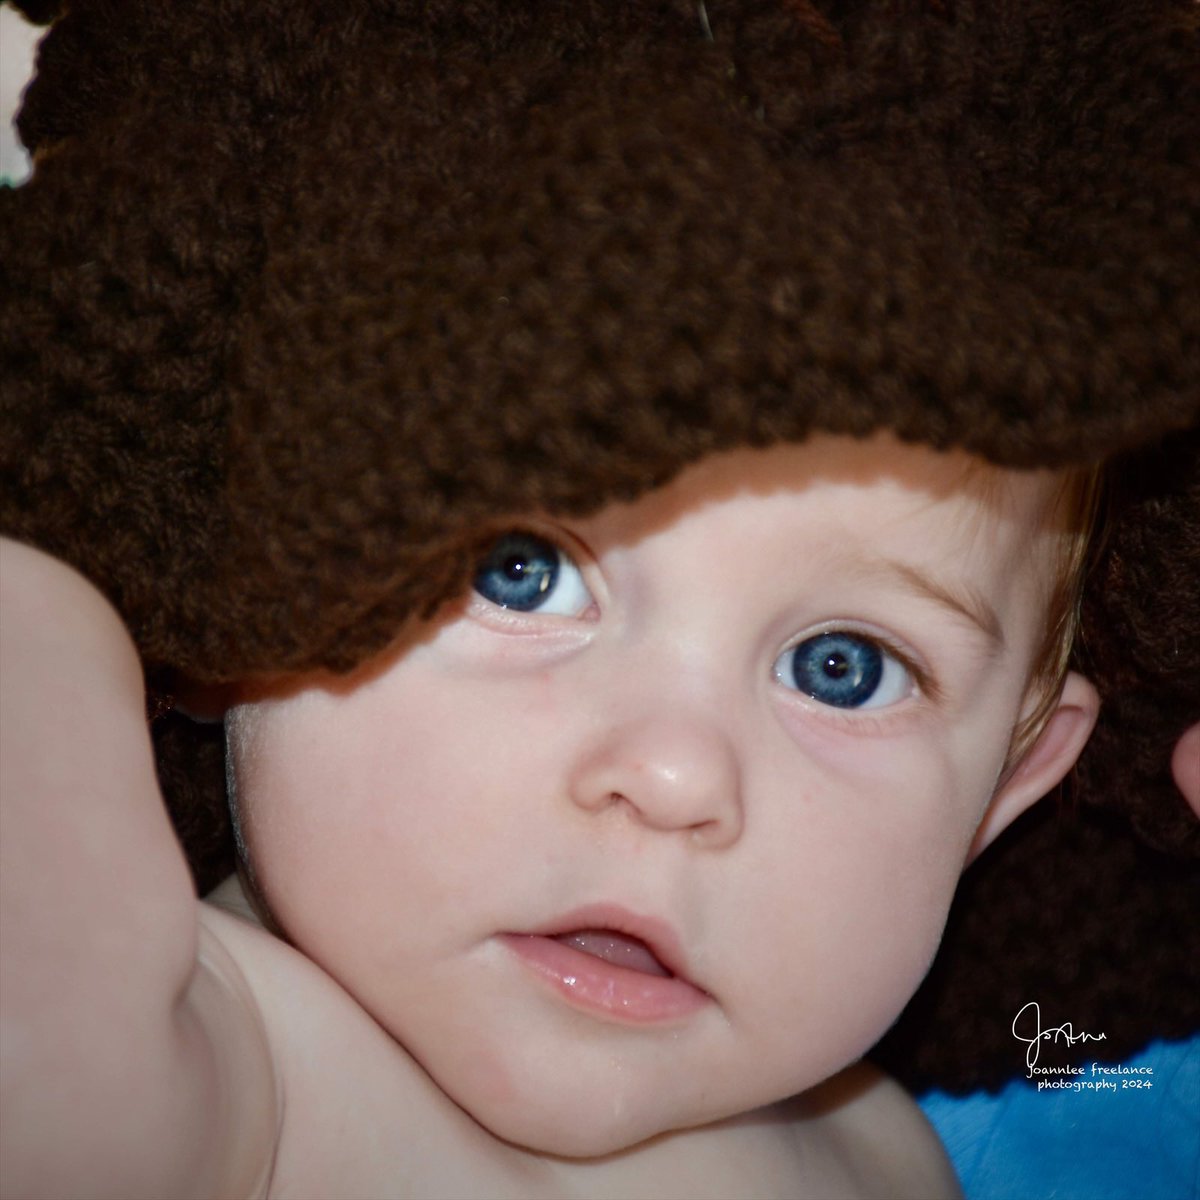 My client asked if I could just capture some moments for her. He’s so handsome. #Photography #CaptureTheMoments #BlueEyes #BeautifulBabyBoy #MondayVibes